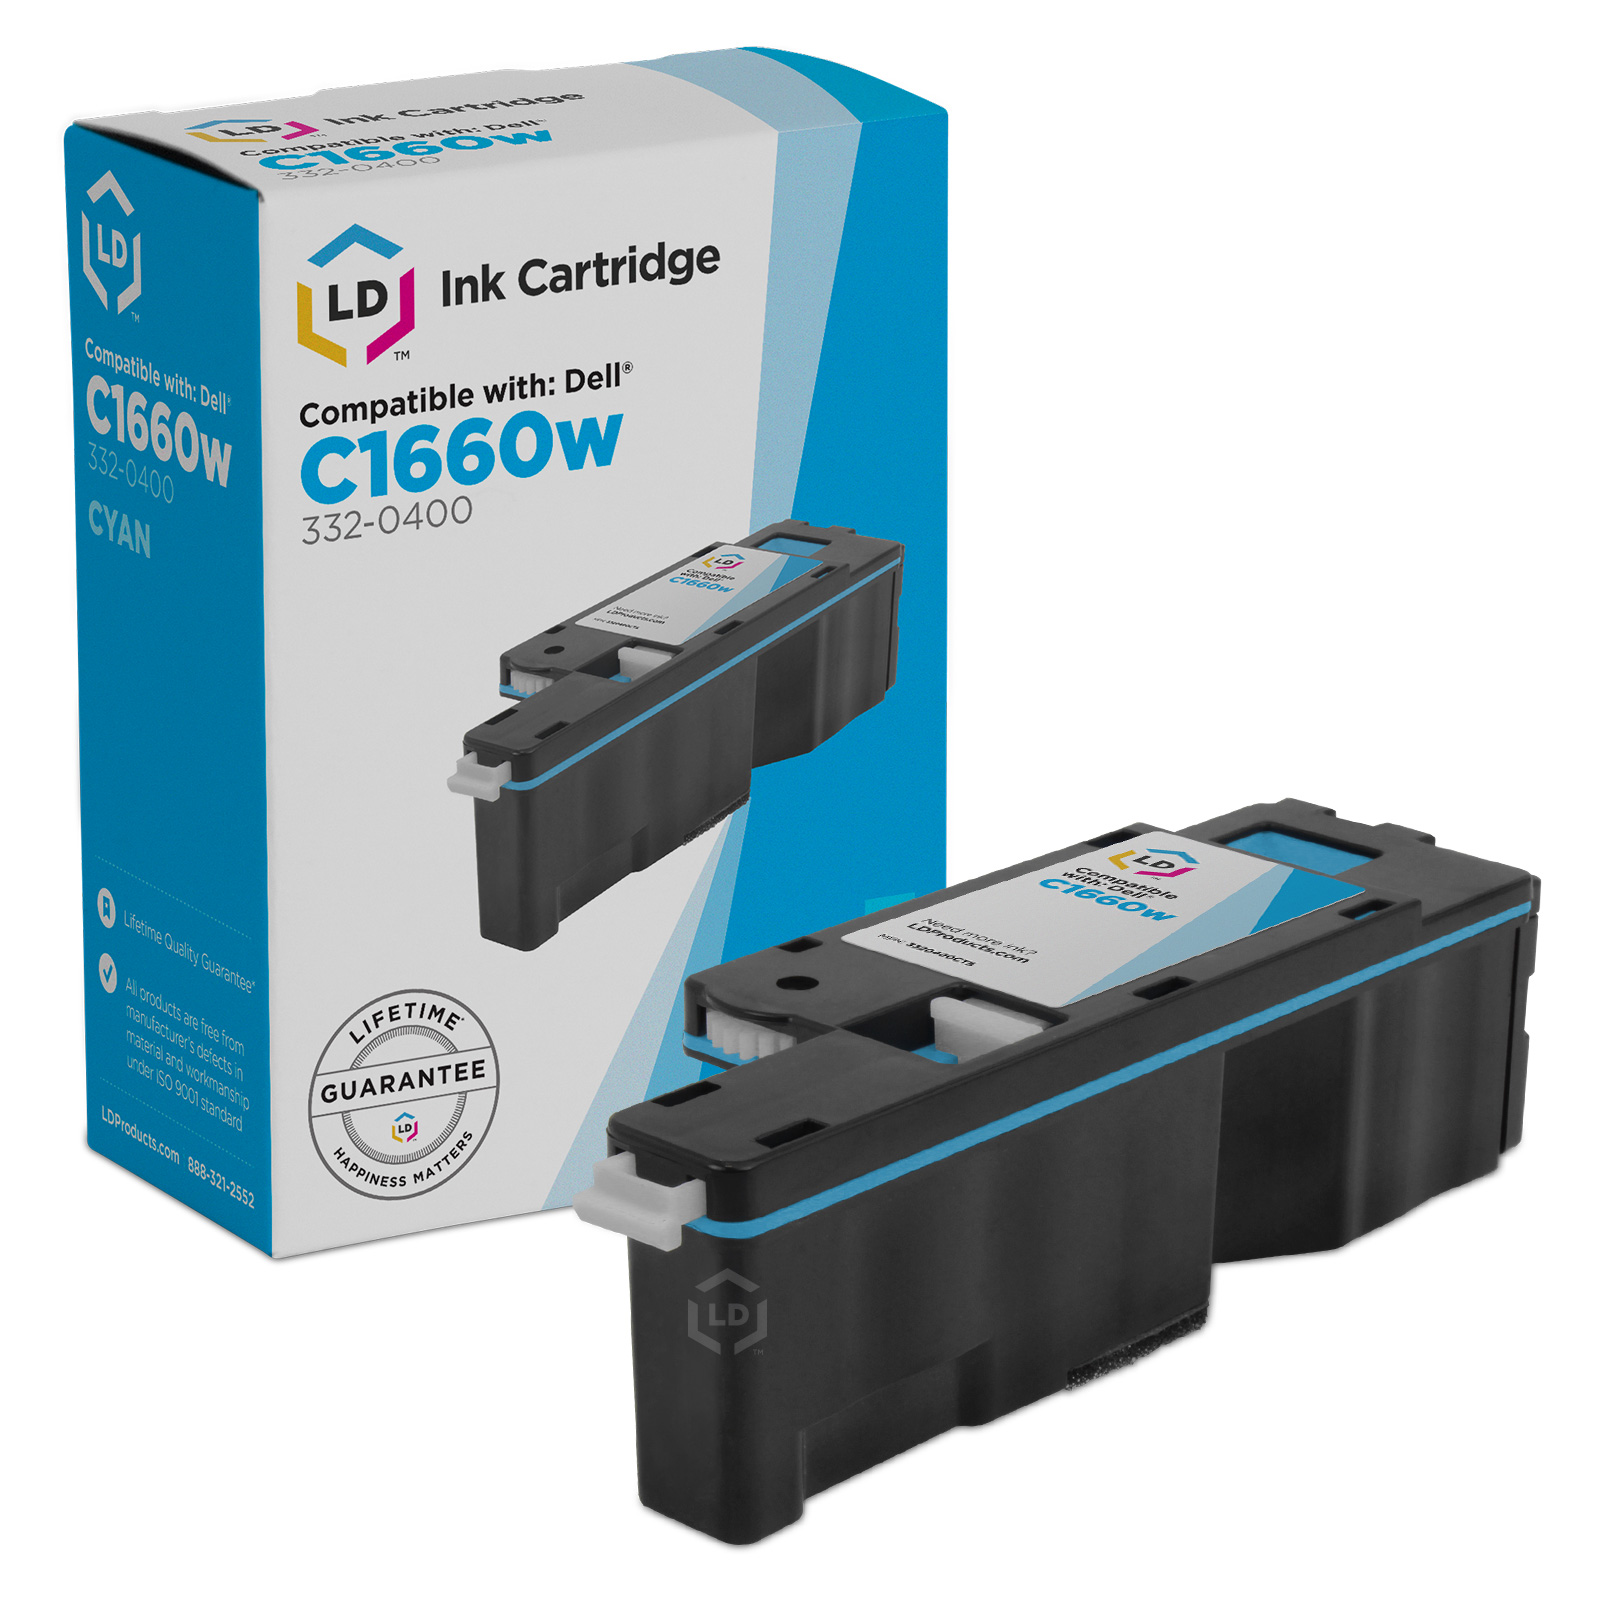 LD Compatible Replacement for Dell 332-0400 / 5R6J0 Cyan Laser Toner Cartridge for use in Dell Color Laser C1660w - image 1 of 6